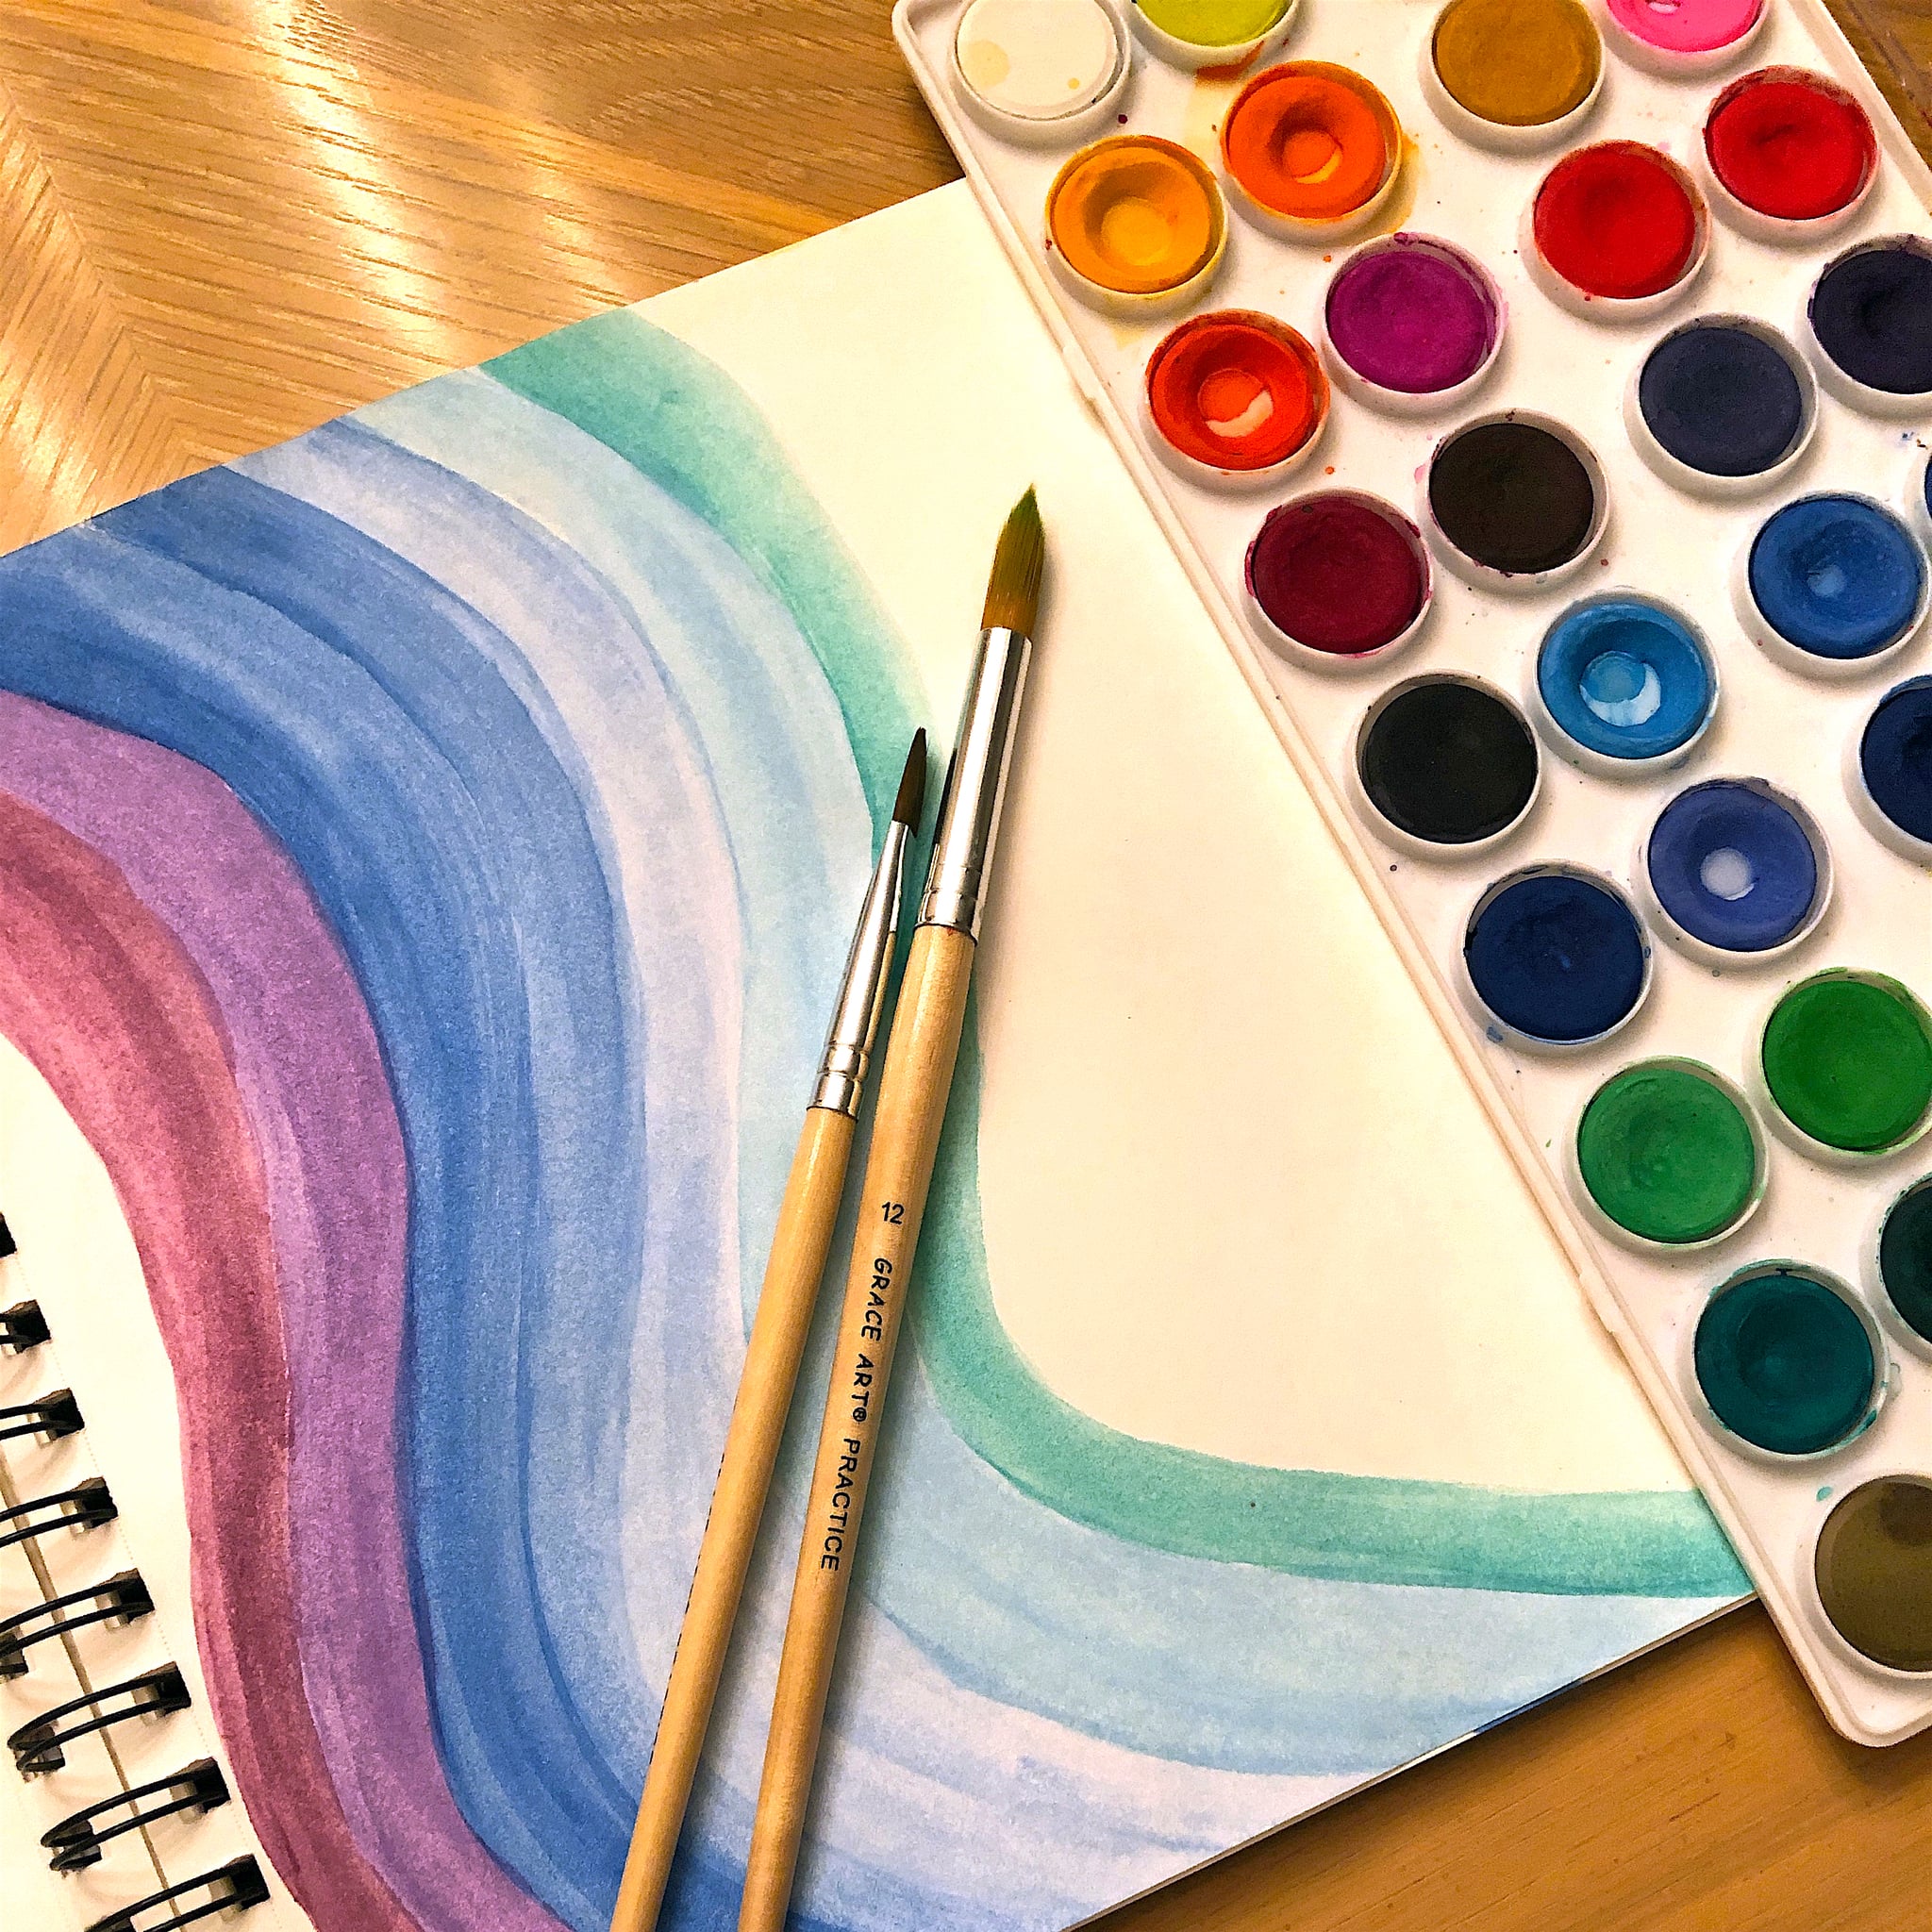 Watercolor Painting: Tips For Beginners, Products You Need | POPSUGAR Smart Living